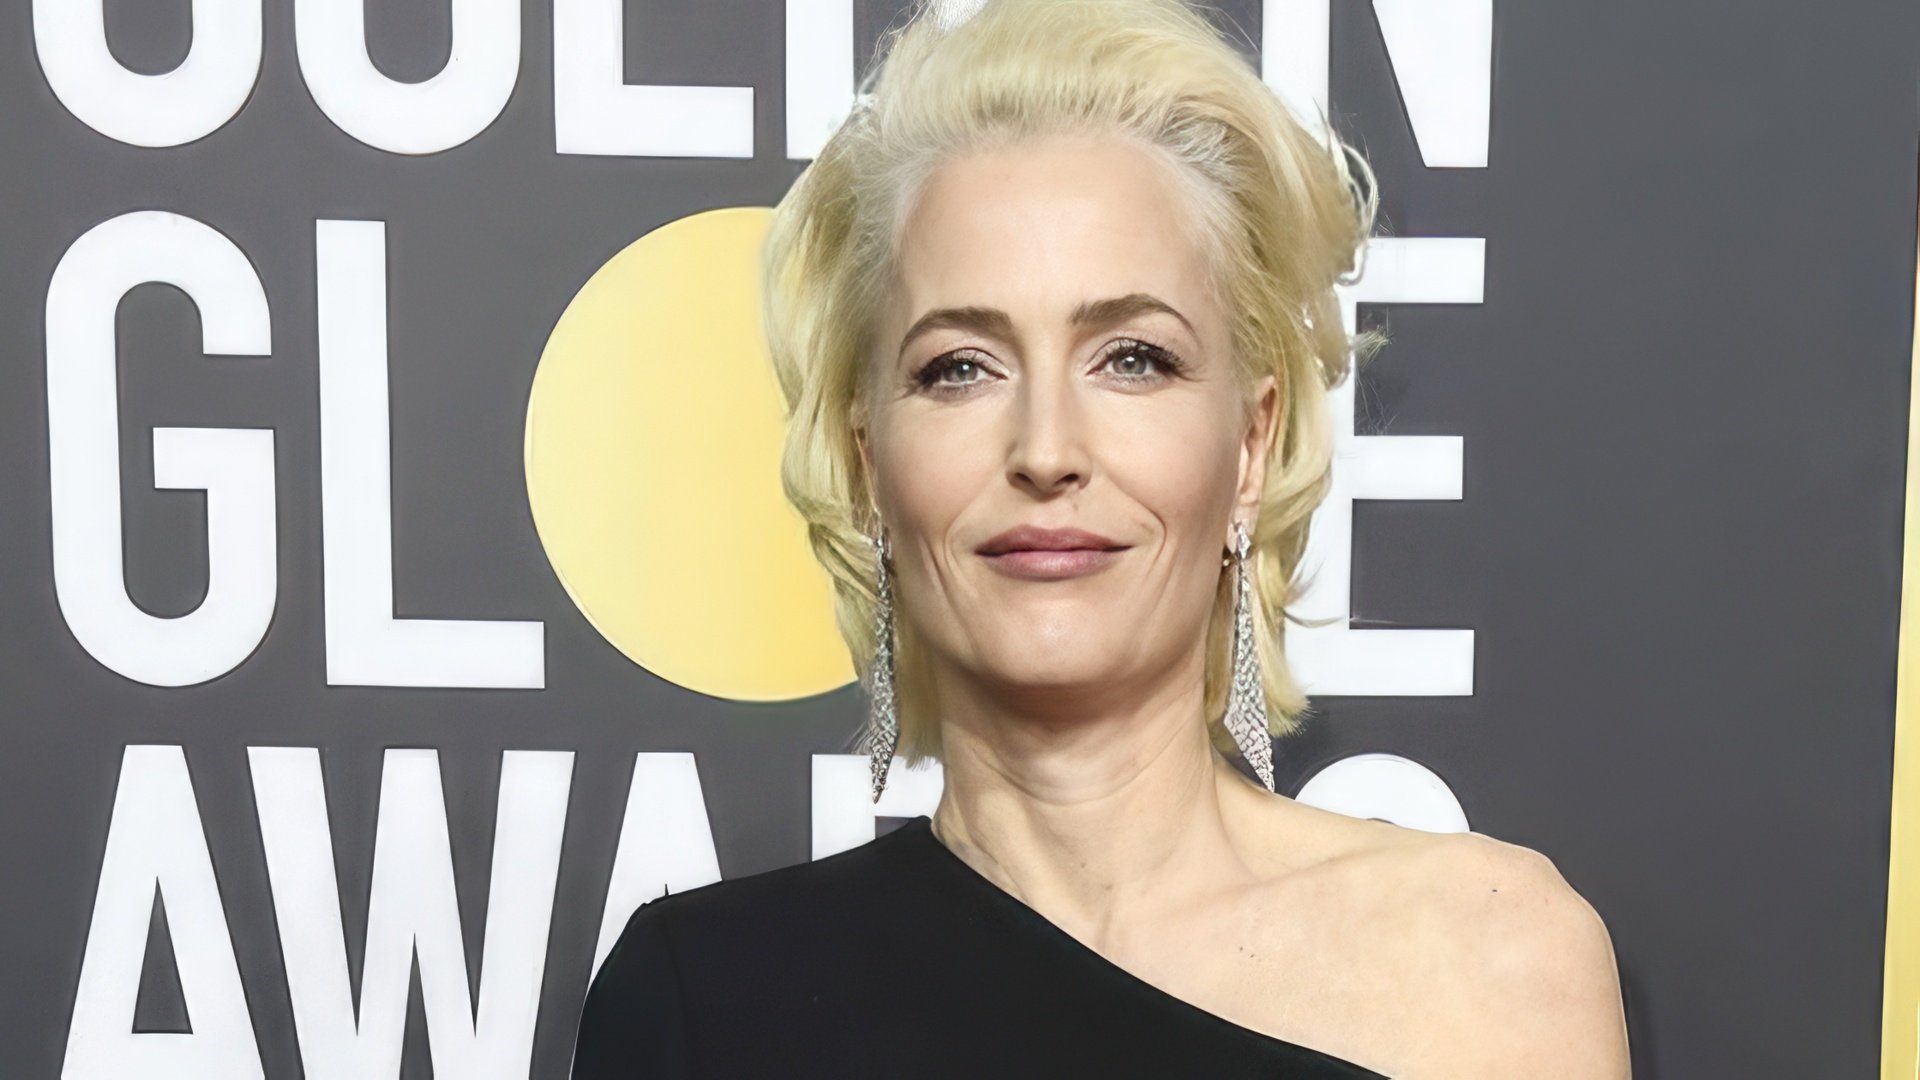 In 2018, Gillian Anderson turned 50